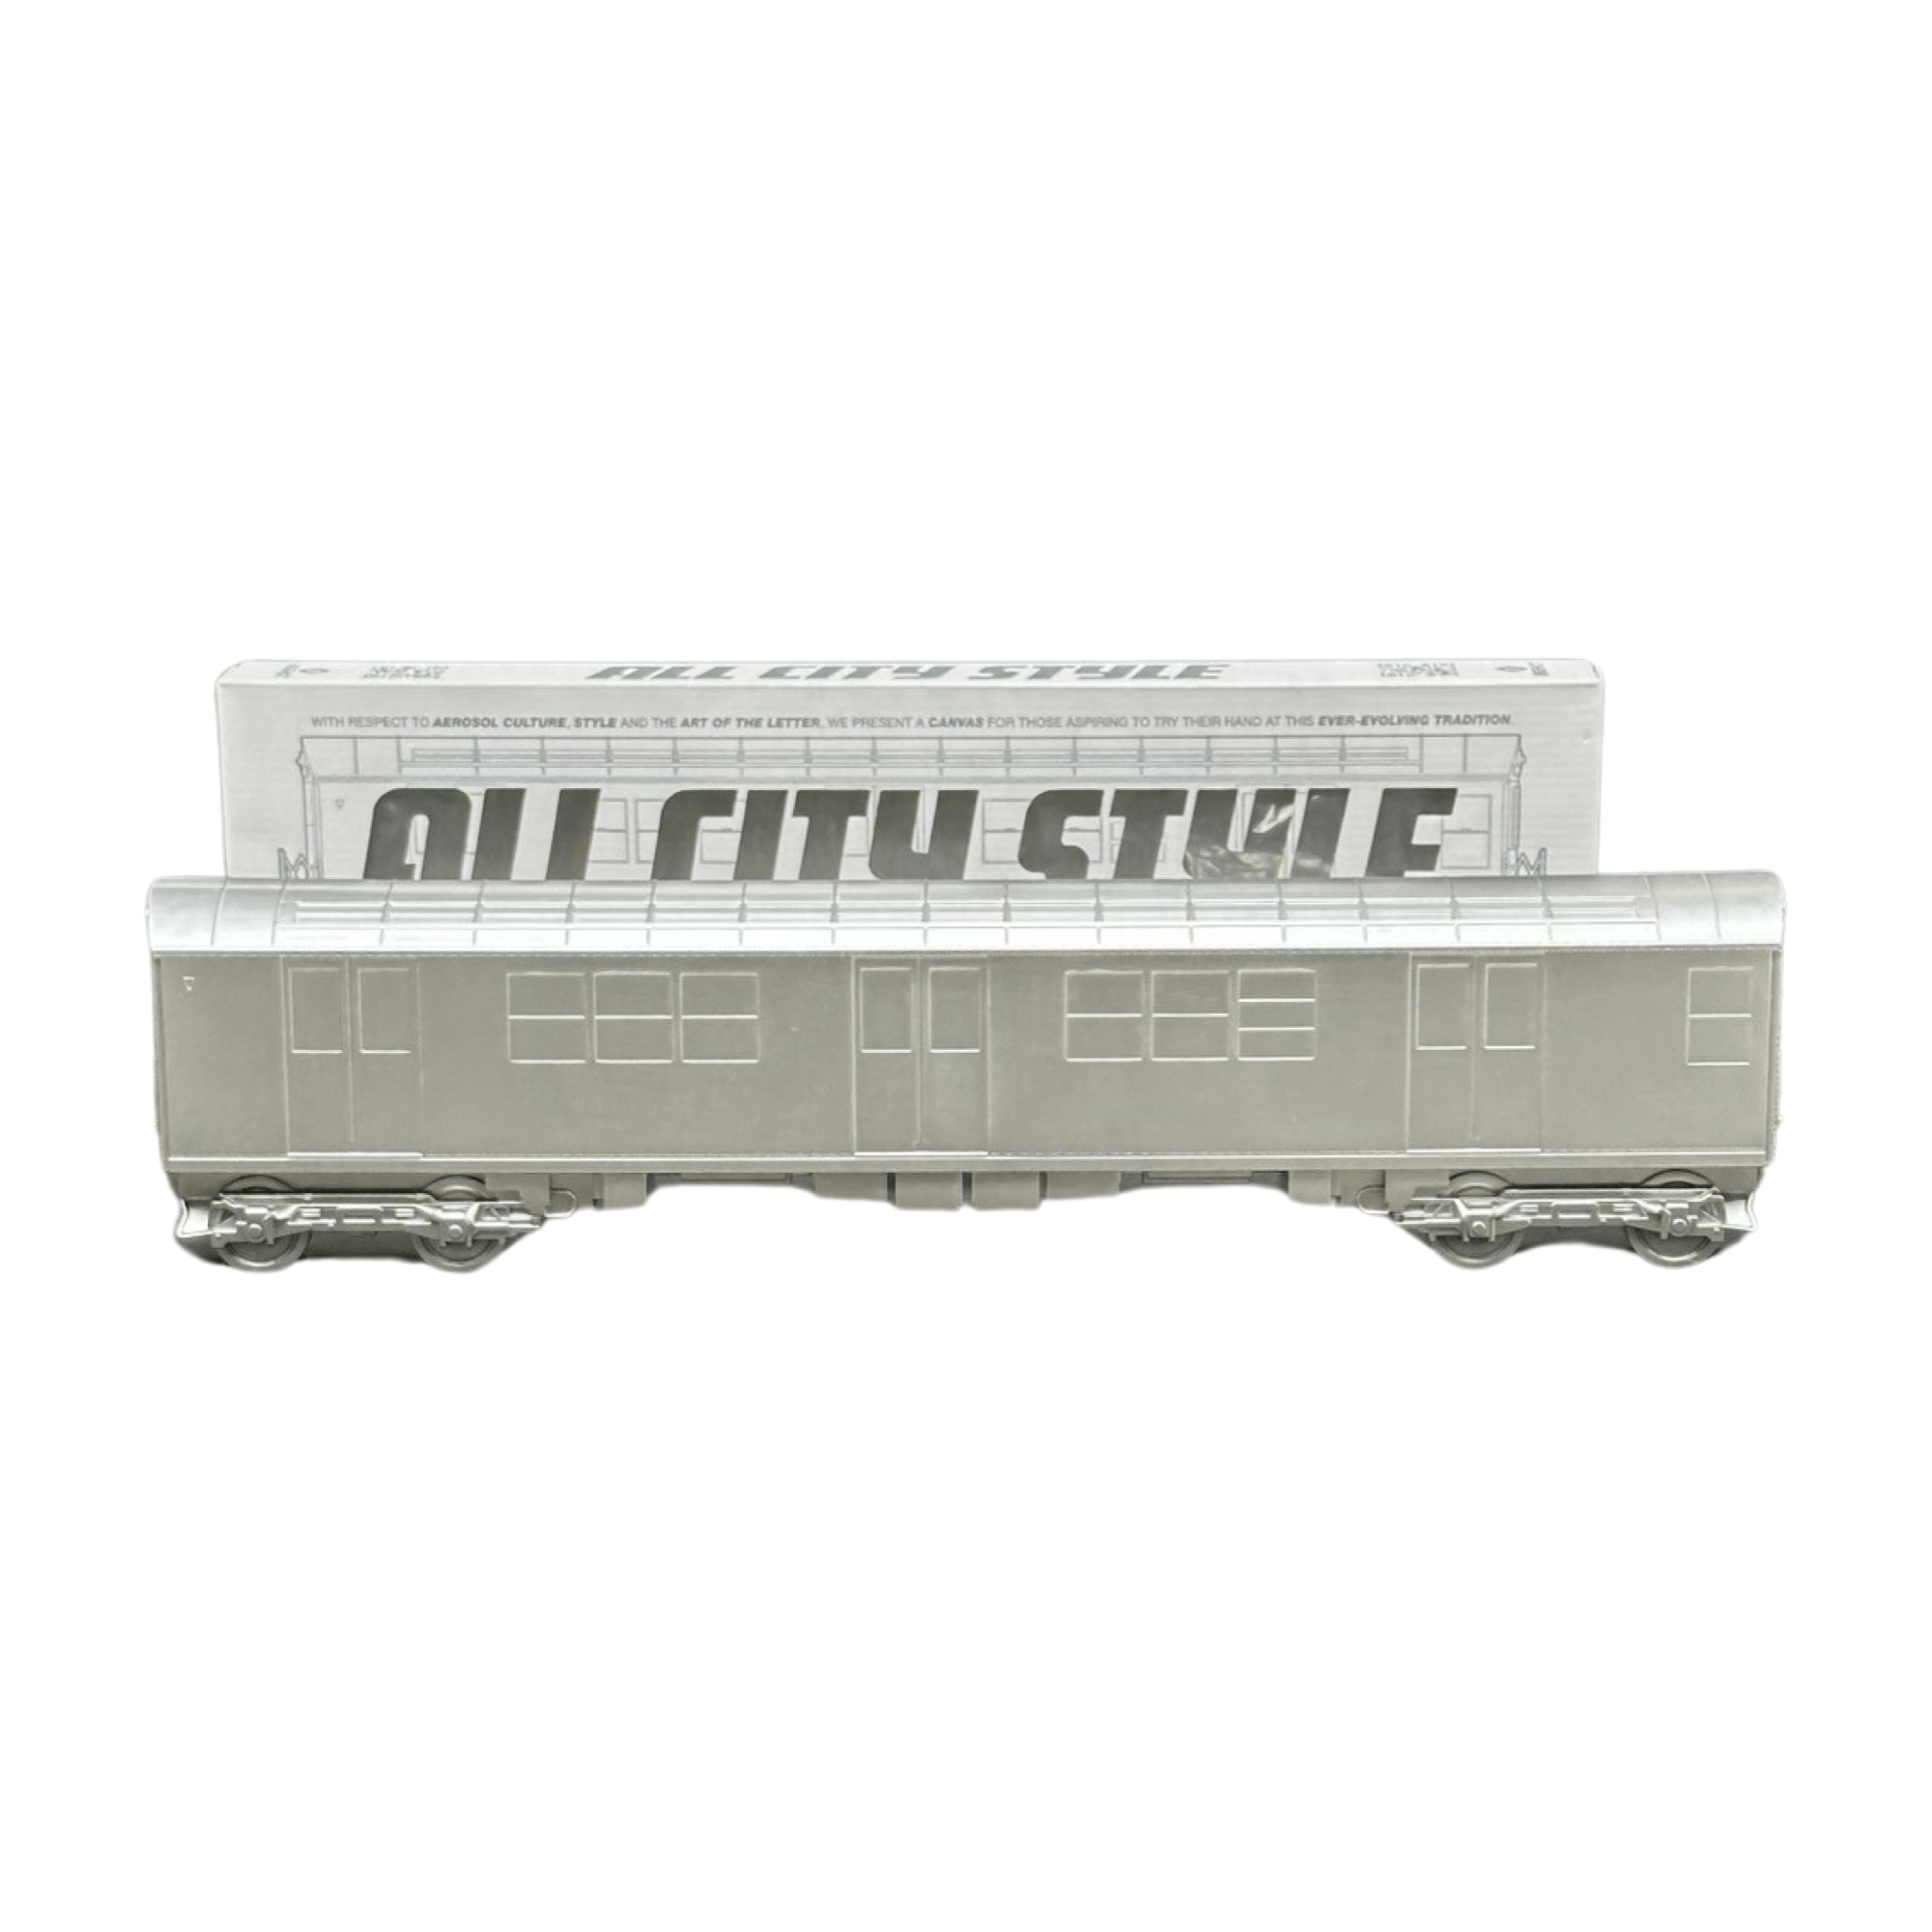 All City Style Silver Train 20" Figure 01 |Monkey Paw Mexico